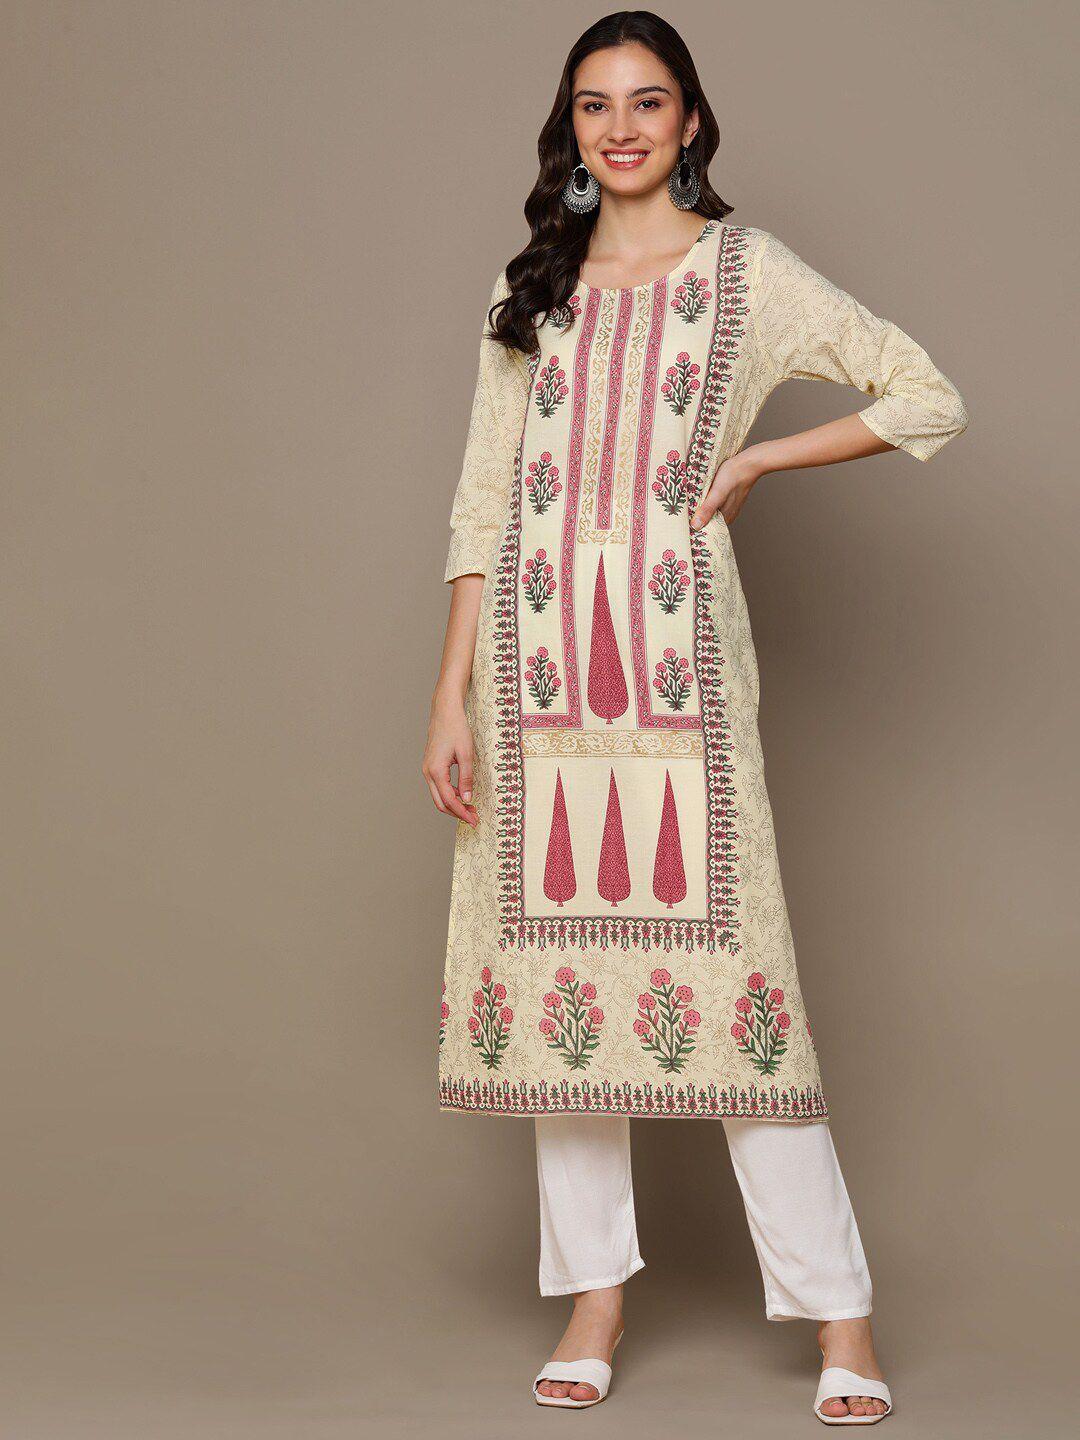 here&now cream-color & pink floral printed straight kurta